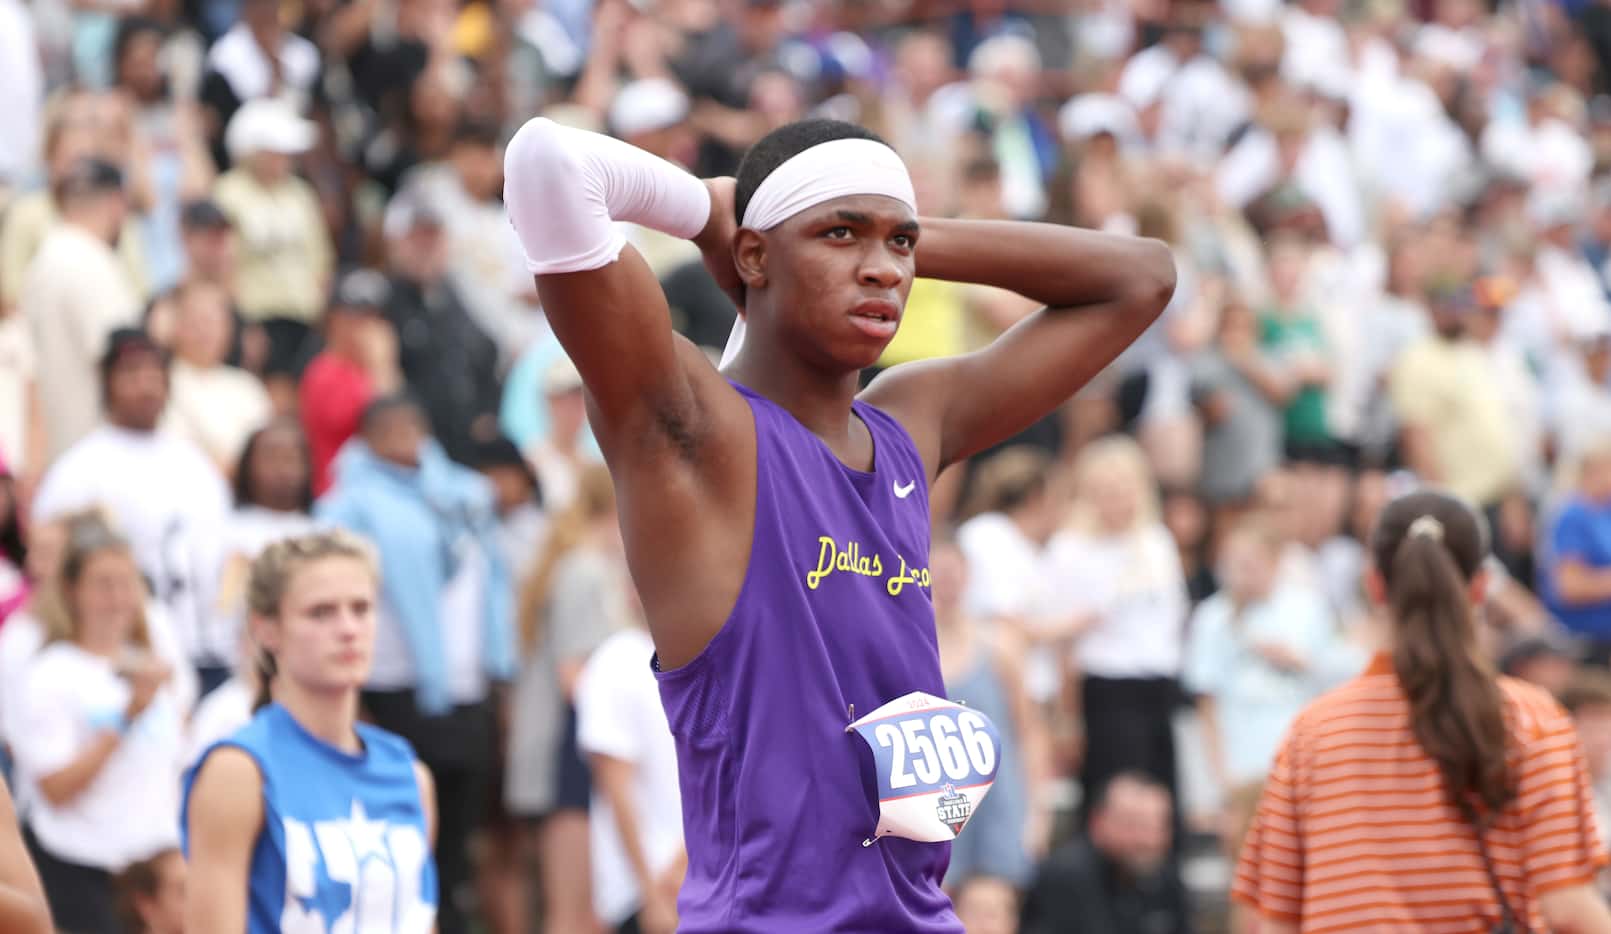 Dallas Lincoln's Roy Hughes awaits his finishing time following the Class 4A Boys 110 meters...